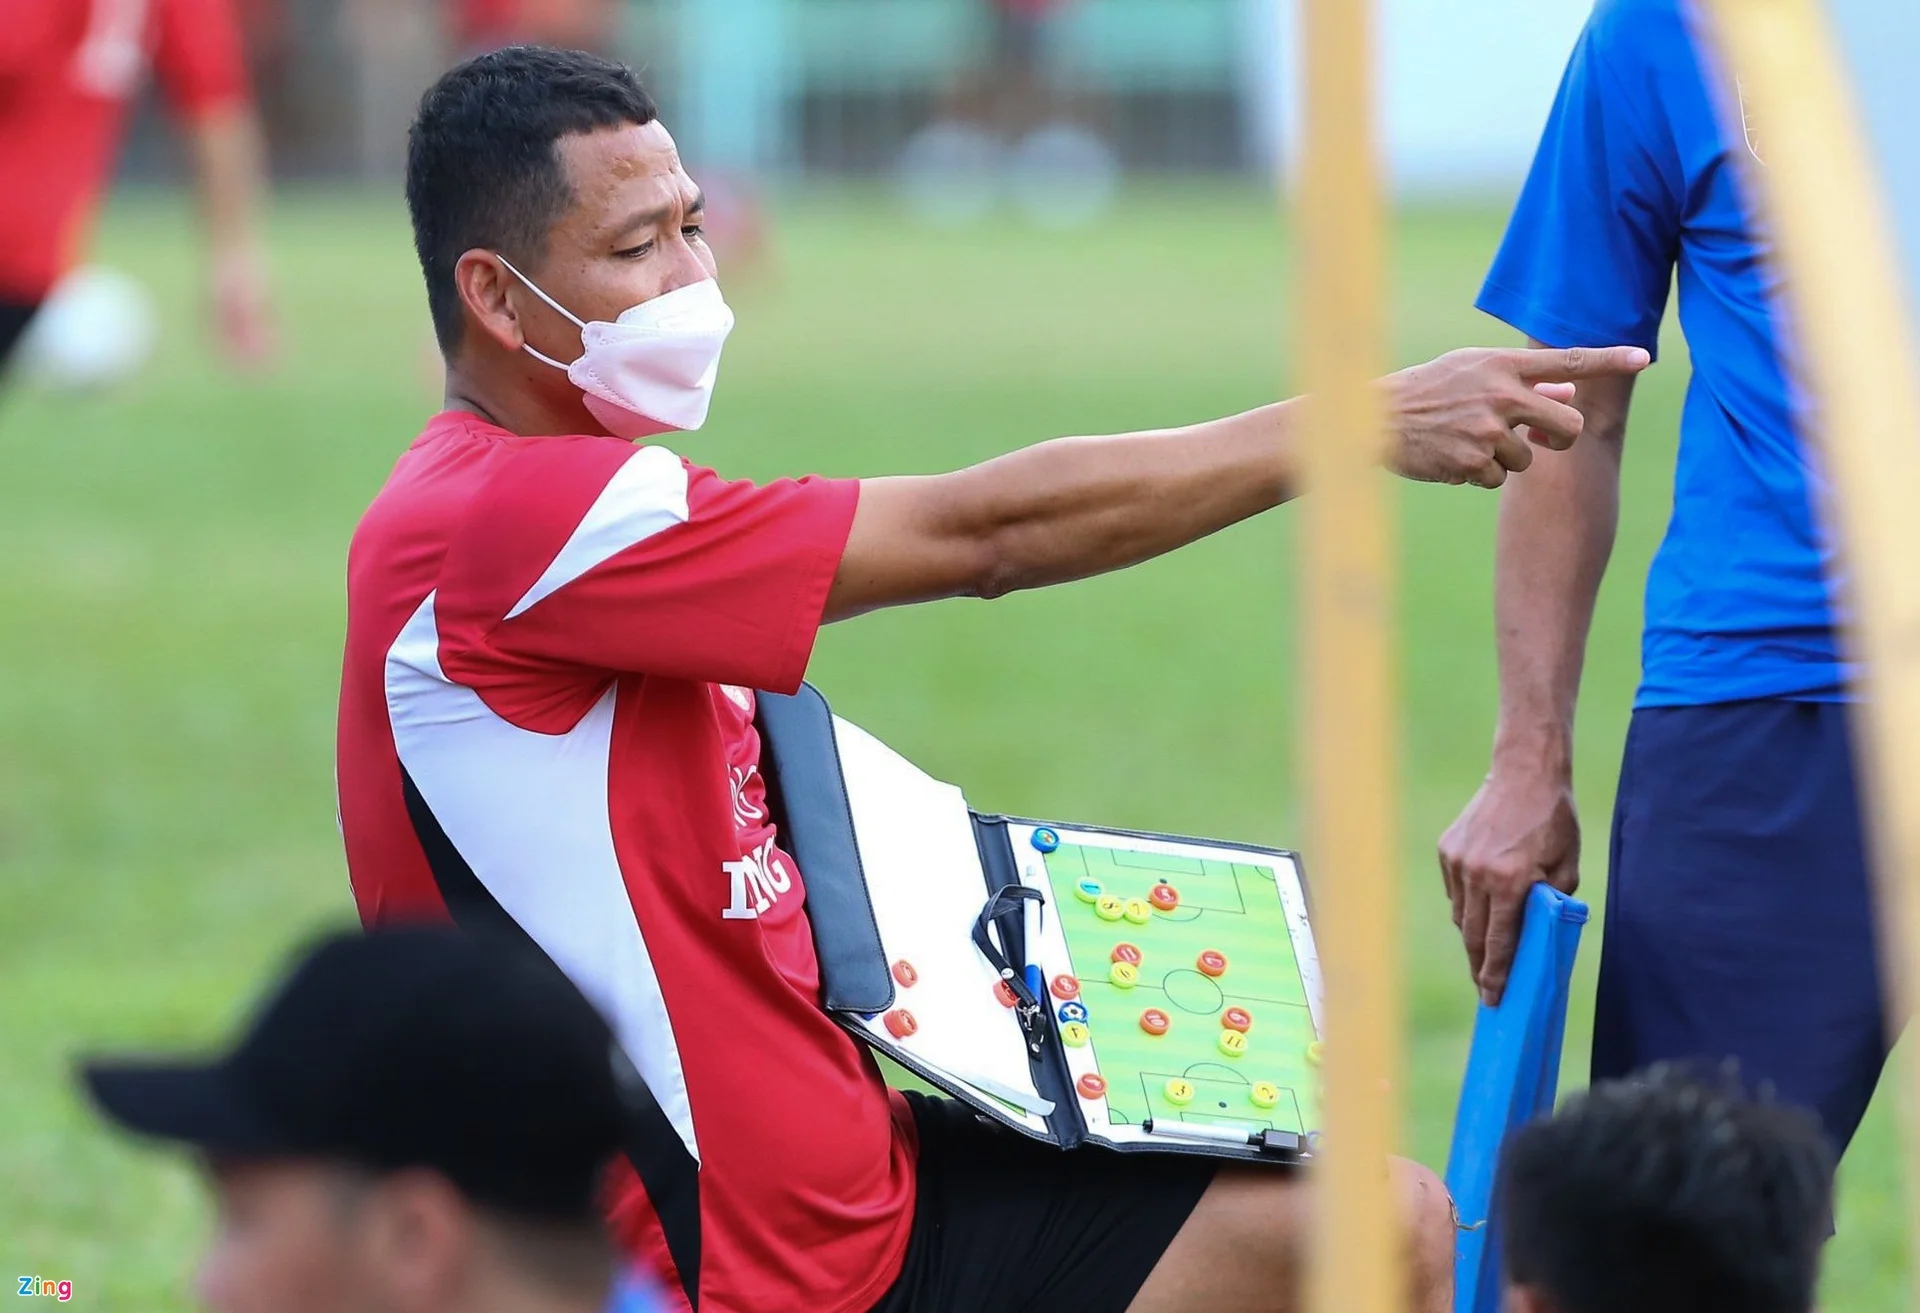 Since the 2021 season, Anh Duc has assisted in coaching at Long An Club, but until now, he has just started to directly hold the table to direct the team's tactics. Photo: Bao Toan.